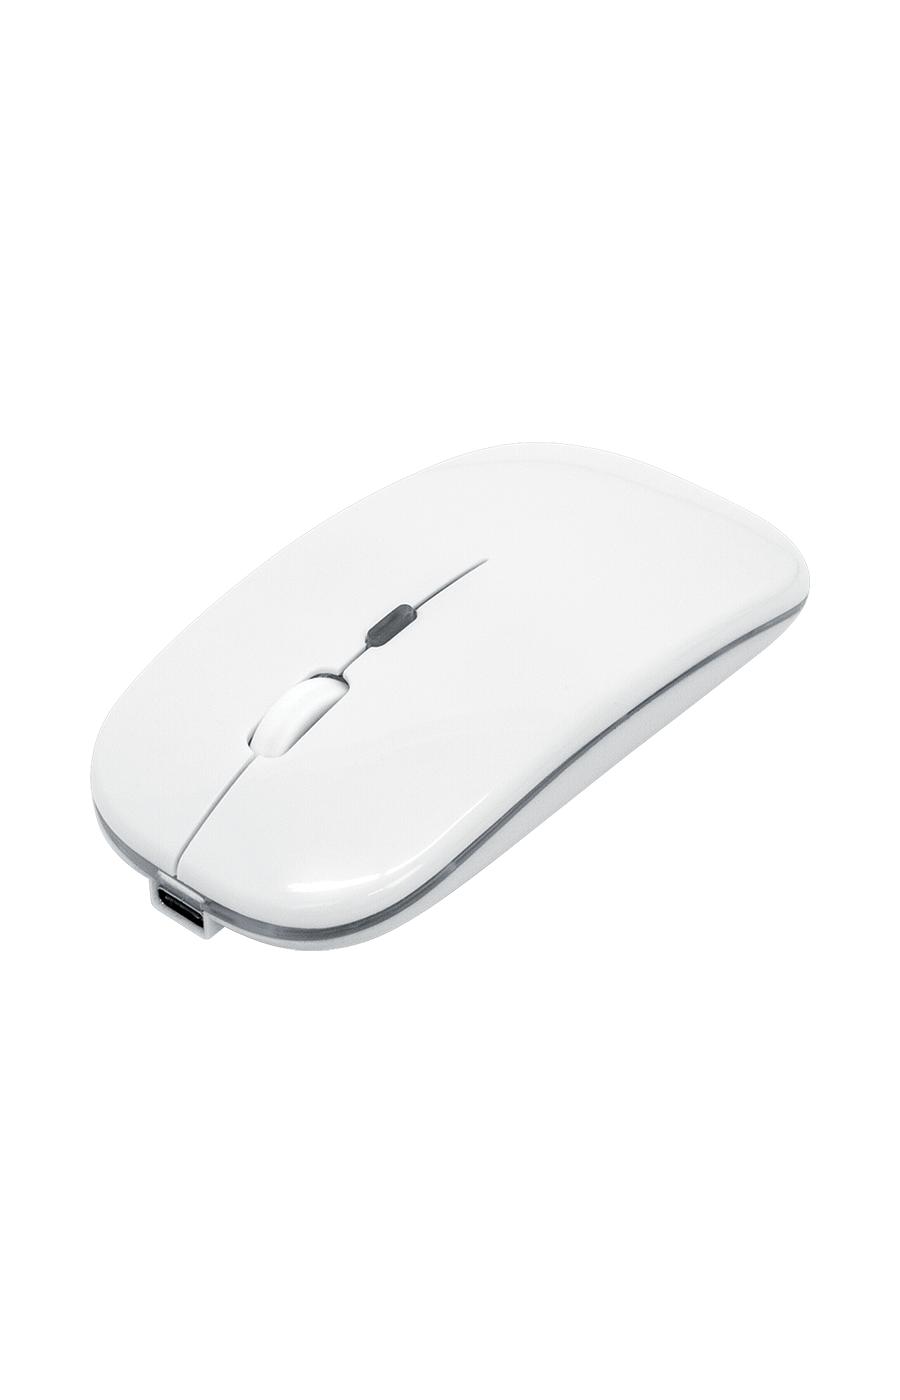 Helix Dual Wireless Mode Mouse - White; image 3 of 3